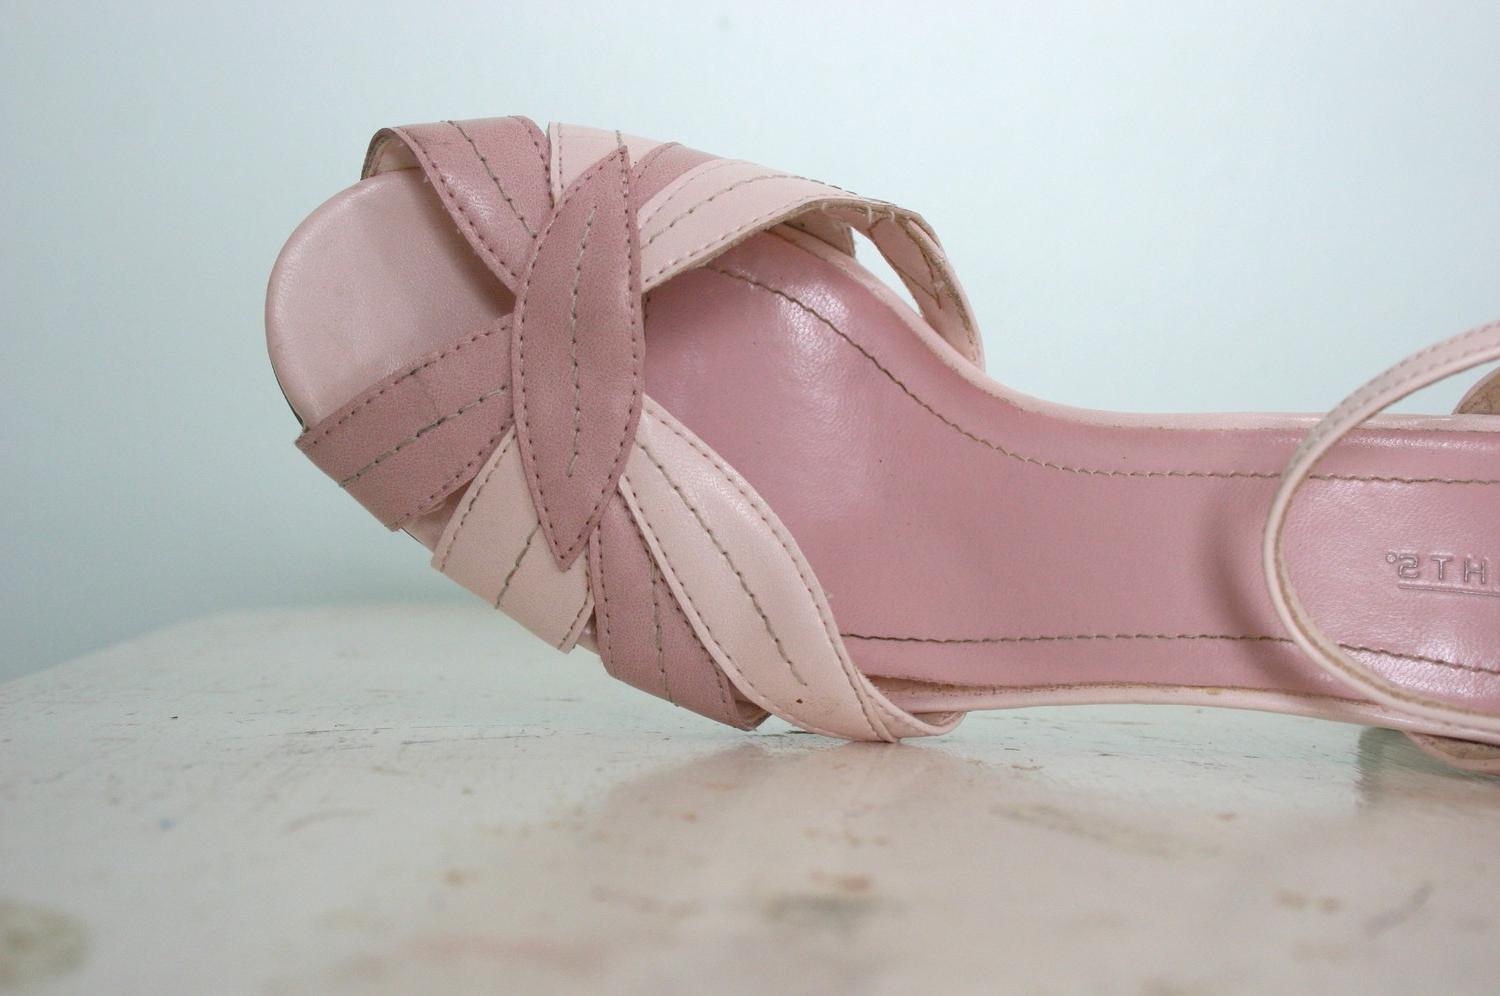 vintage wedding shoes. The vintage style is widely spreading in many fields,